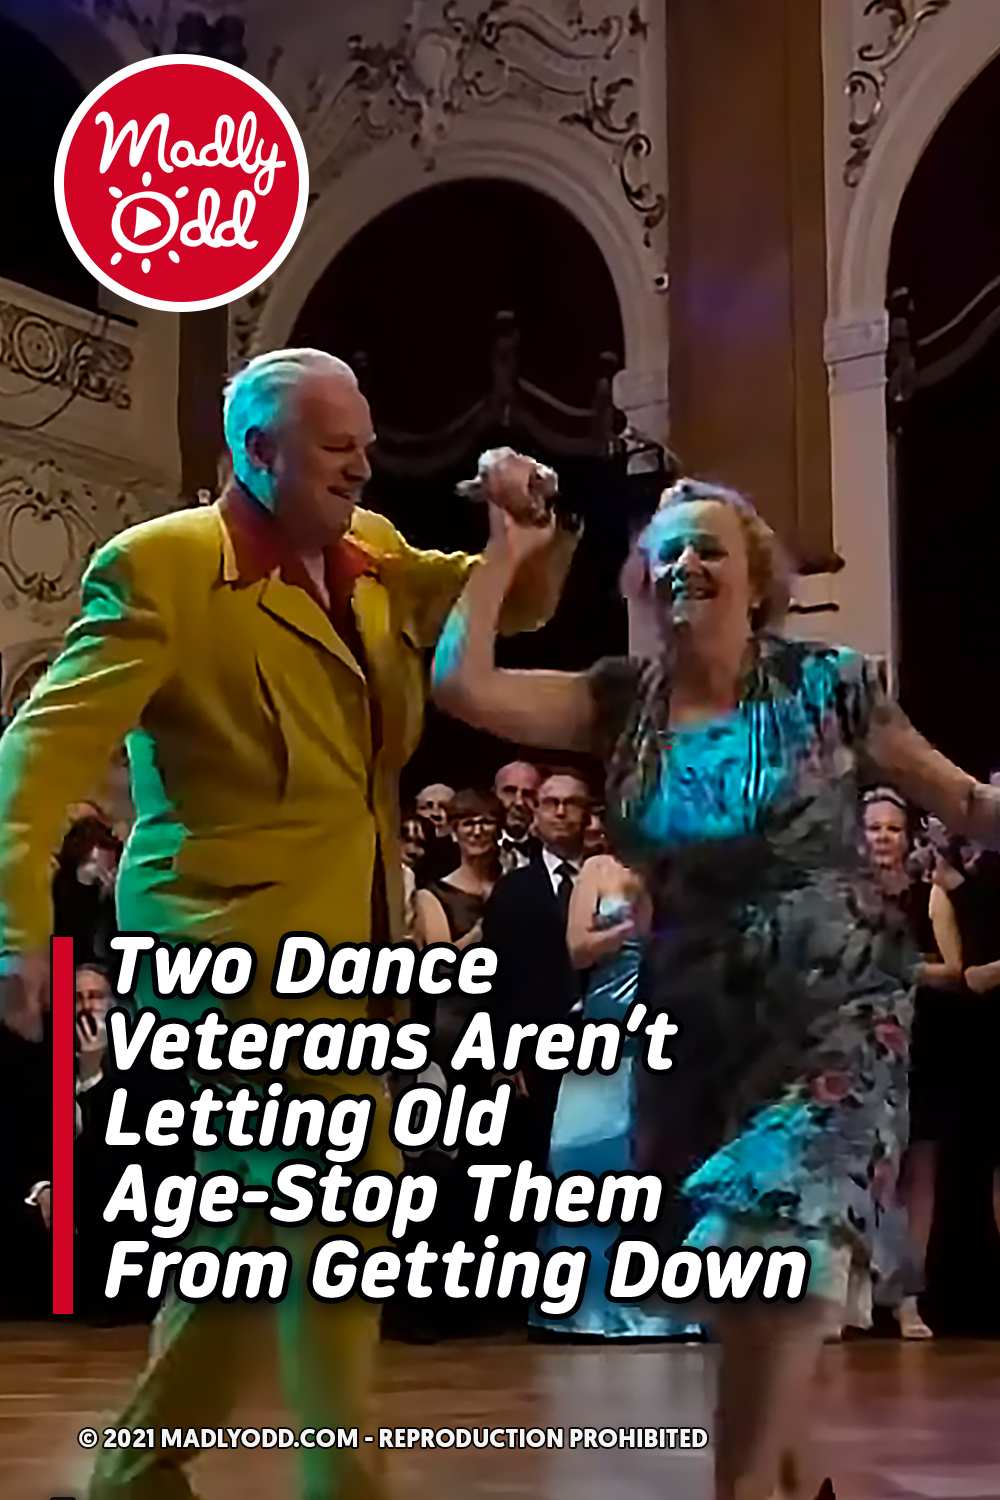 Two Dance Veterans Aren’t Letting Old Age-Stop Them From Getting Down